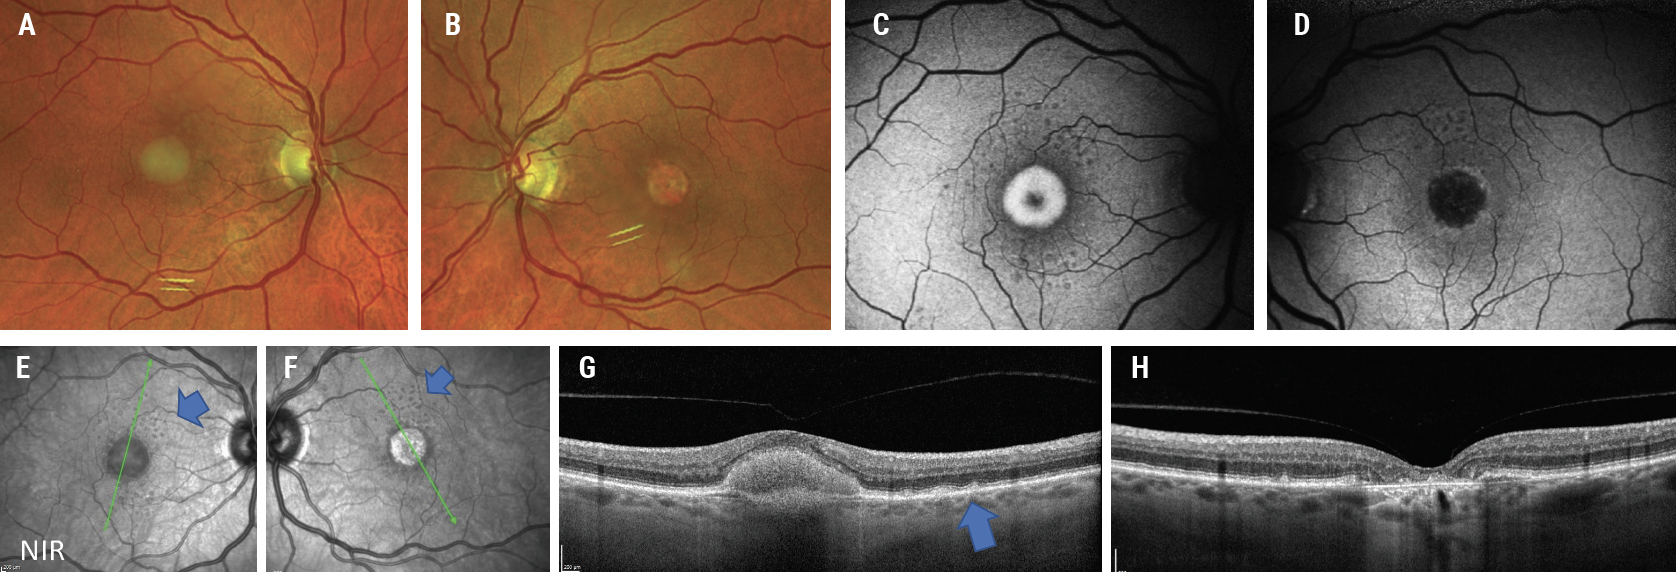 Fig. 1. Fundus photos show a classic foveal vitelliform lesion OD (A) and an atrophic foveal lesion OS (B). FAF of the right eye (C) shows hyperautofluorescence associated with increased lipofuscin, and the left eye (D) shows hypoautofluorescence associated with loss of RPE. The near-infrared reflectance en face images (E, F) show drusen and central lesions (blue arrows). OCT of the right eye (G) shows the central hyperreflective PED lesion and few drusen (blue arrow), and the left eye OCT (H) shows the central RPE and outer retinal atrophy. 